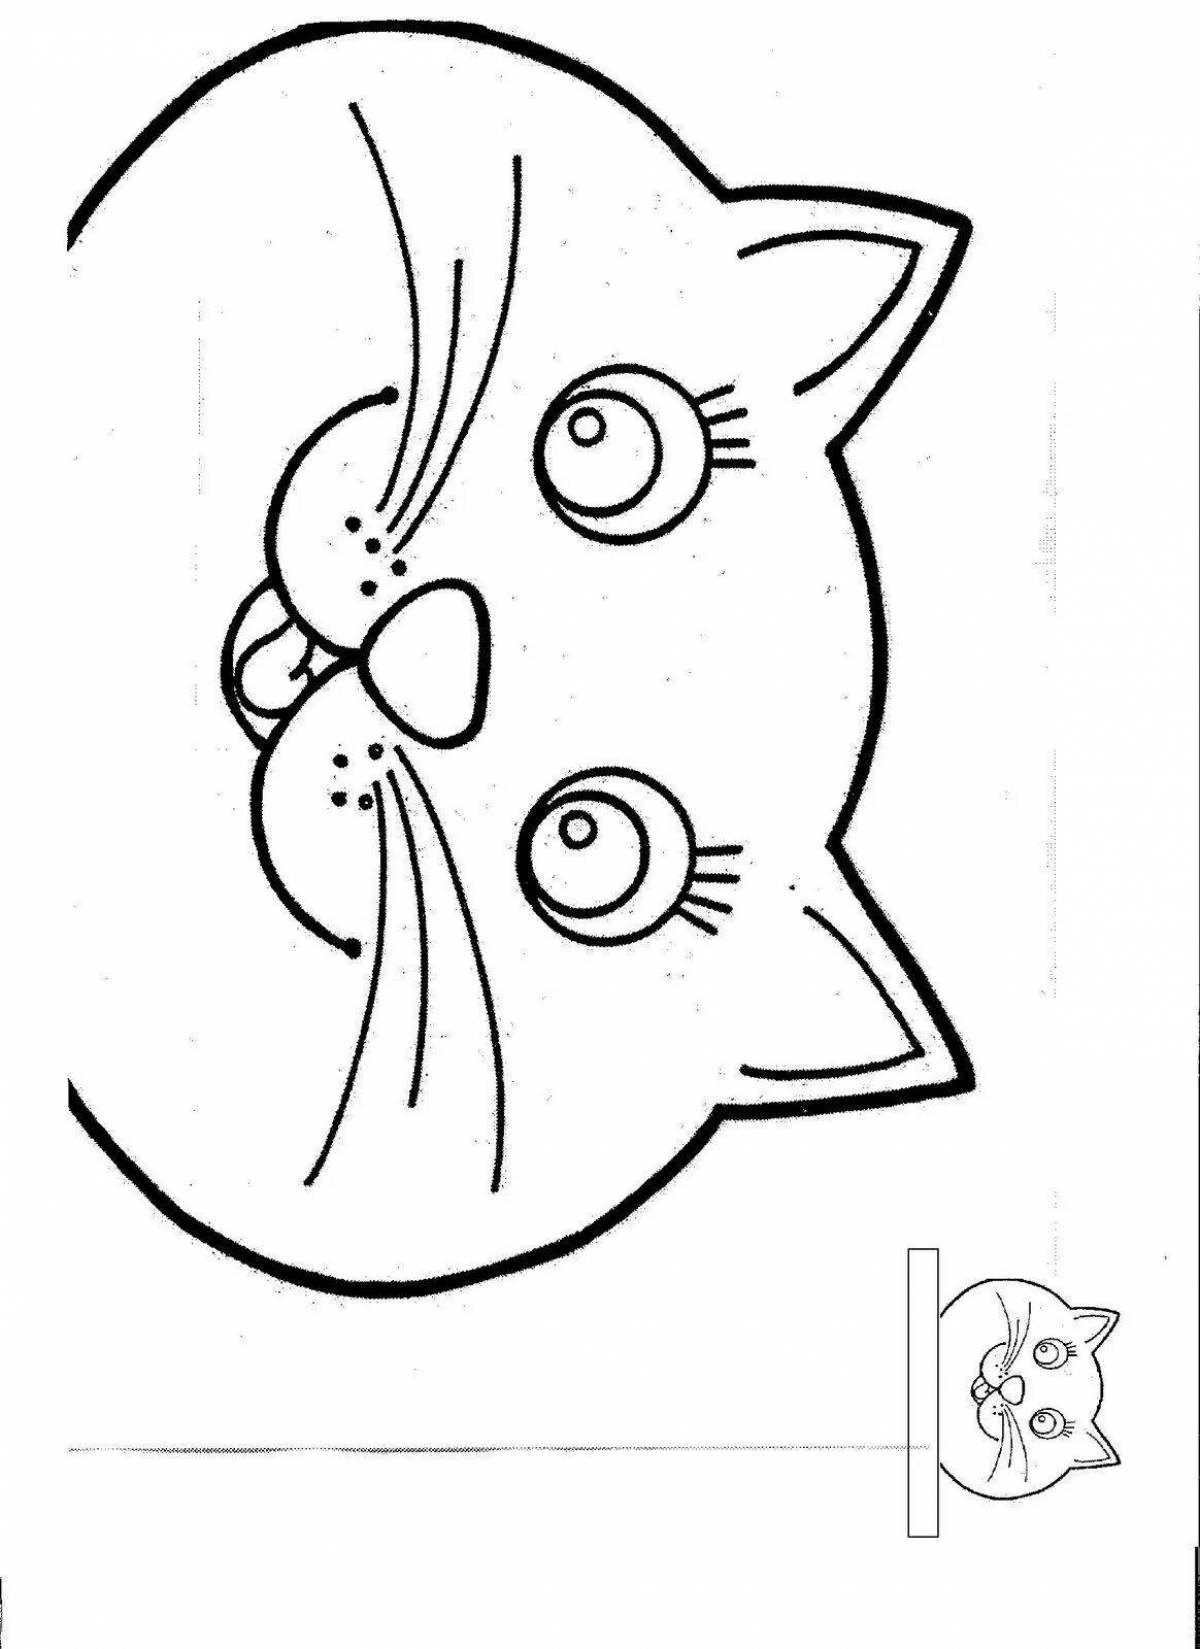 Magnetic cat face coloring book